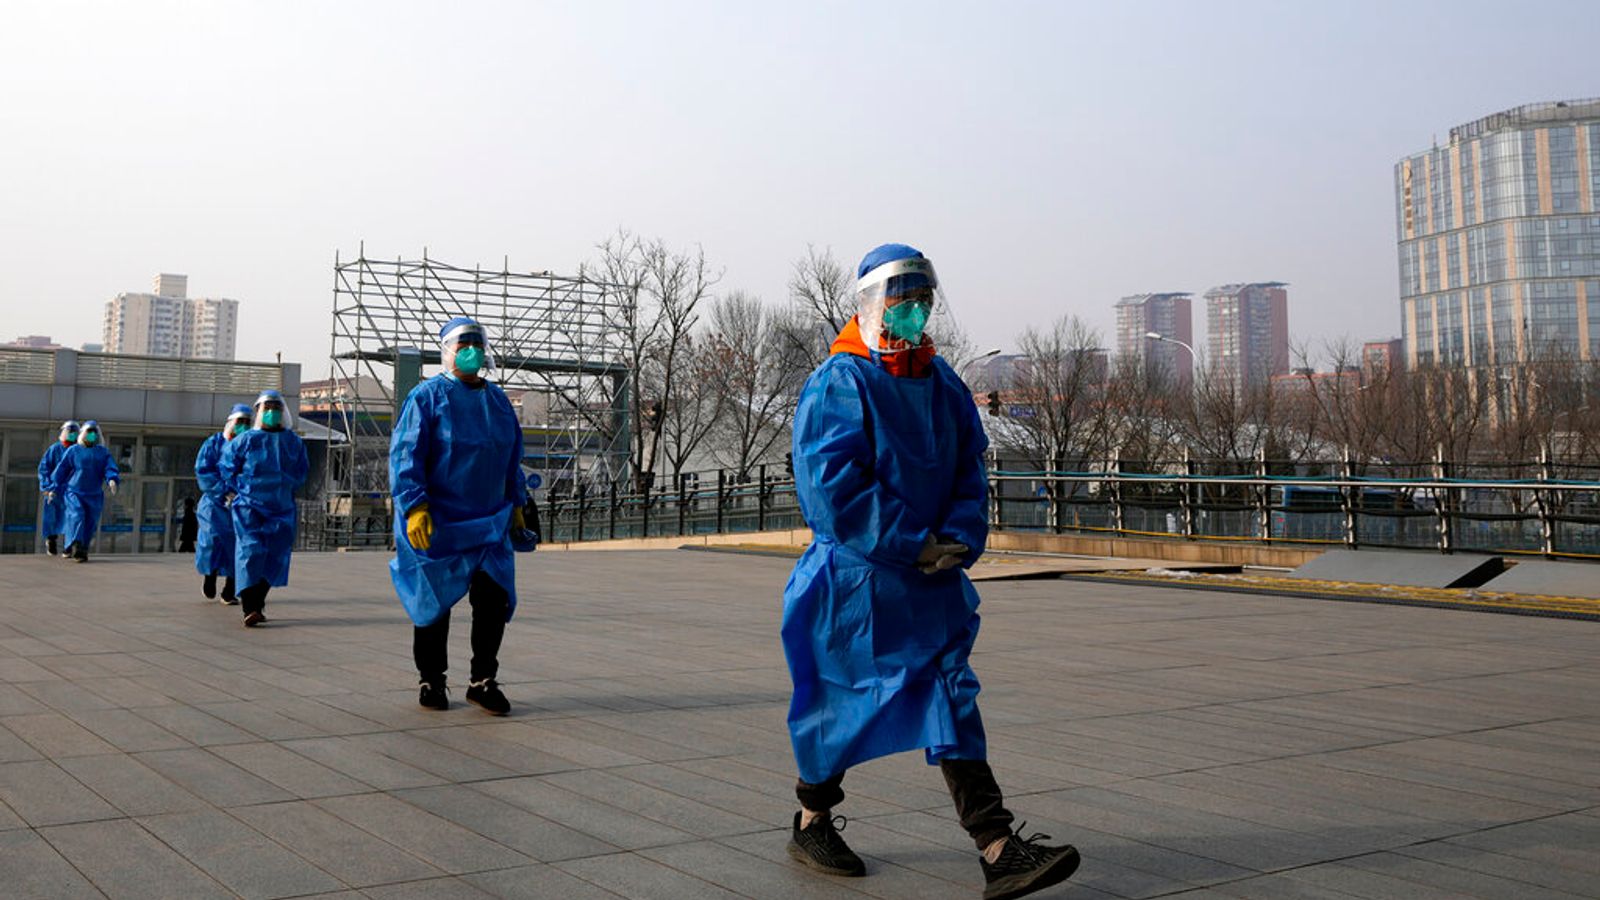 COVID-19: Parts of Beijing sealed off after two cases found - a week before city hosts Winter Olympics